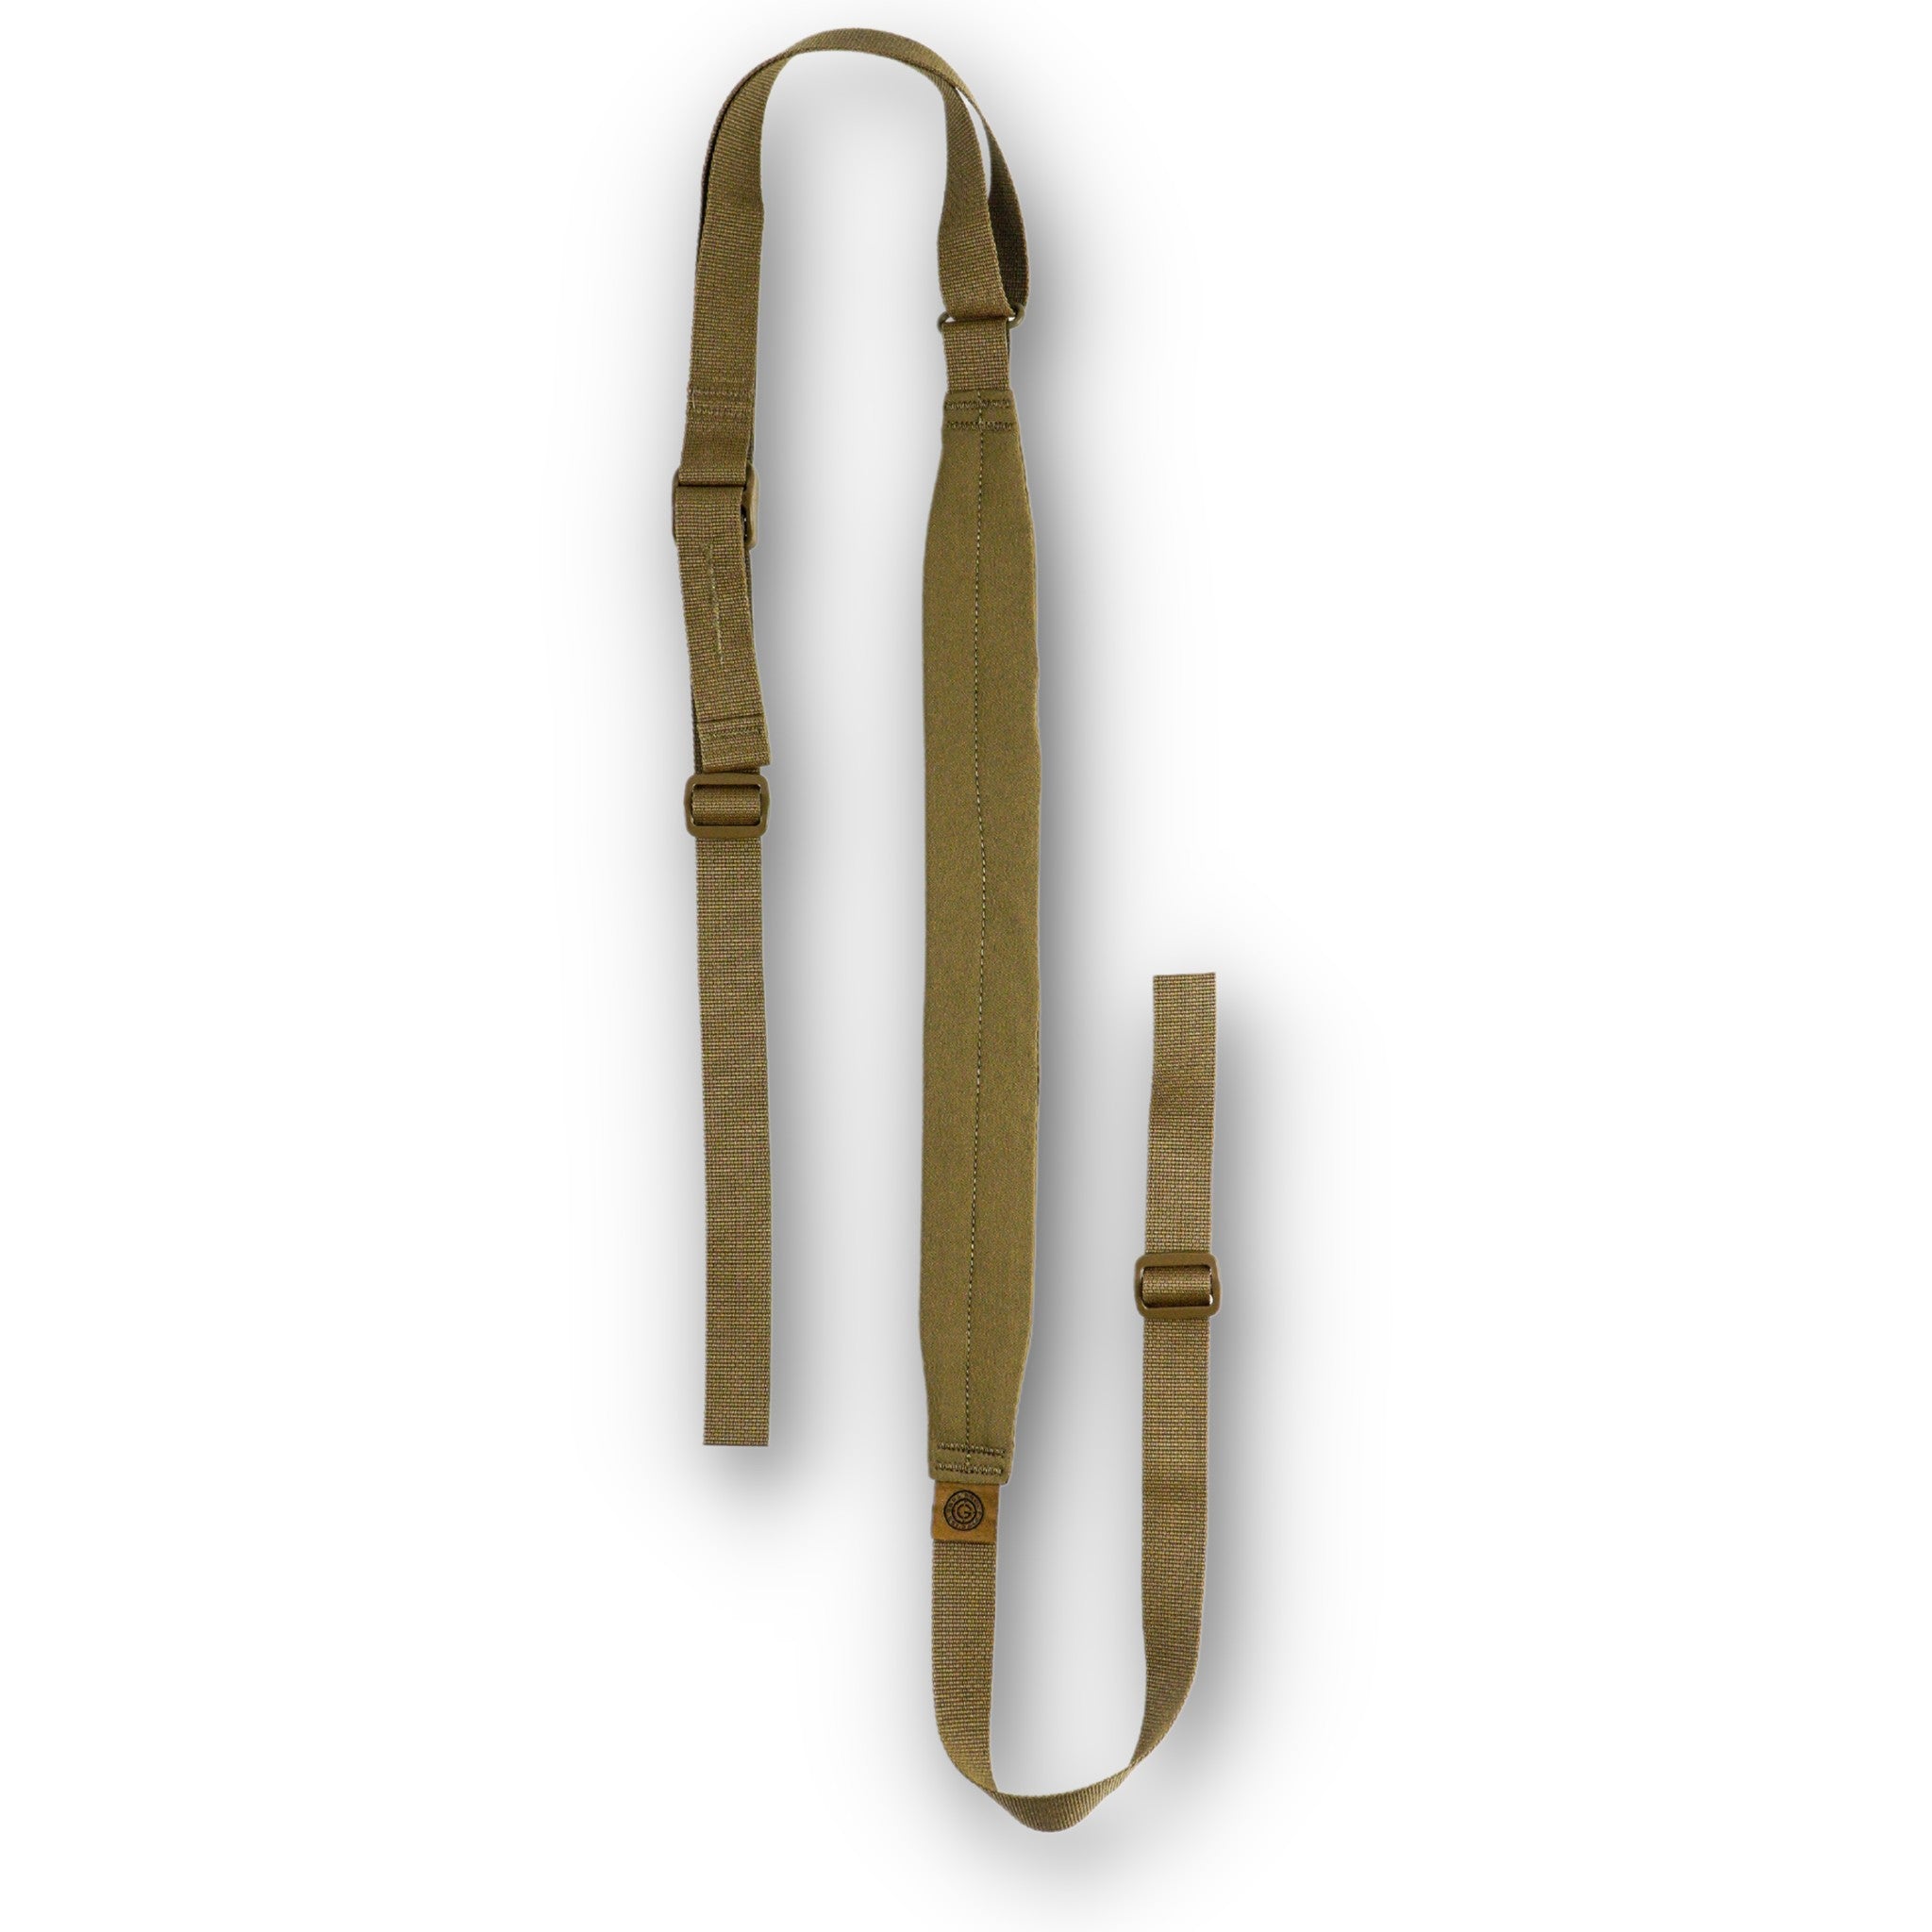 GBRS Group Second Best Sling – GBRS Group Gear